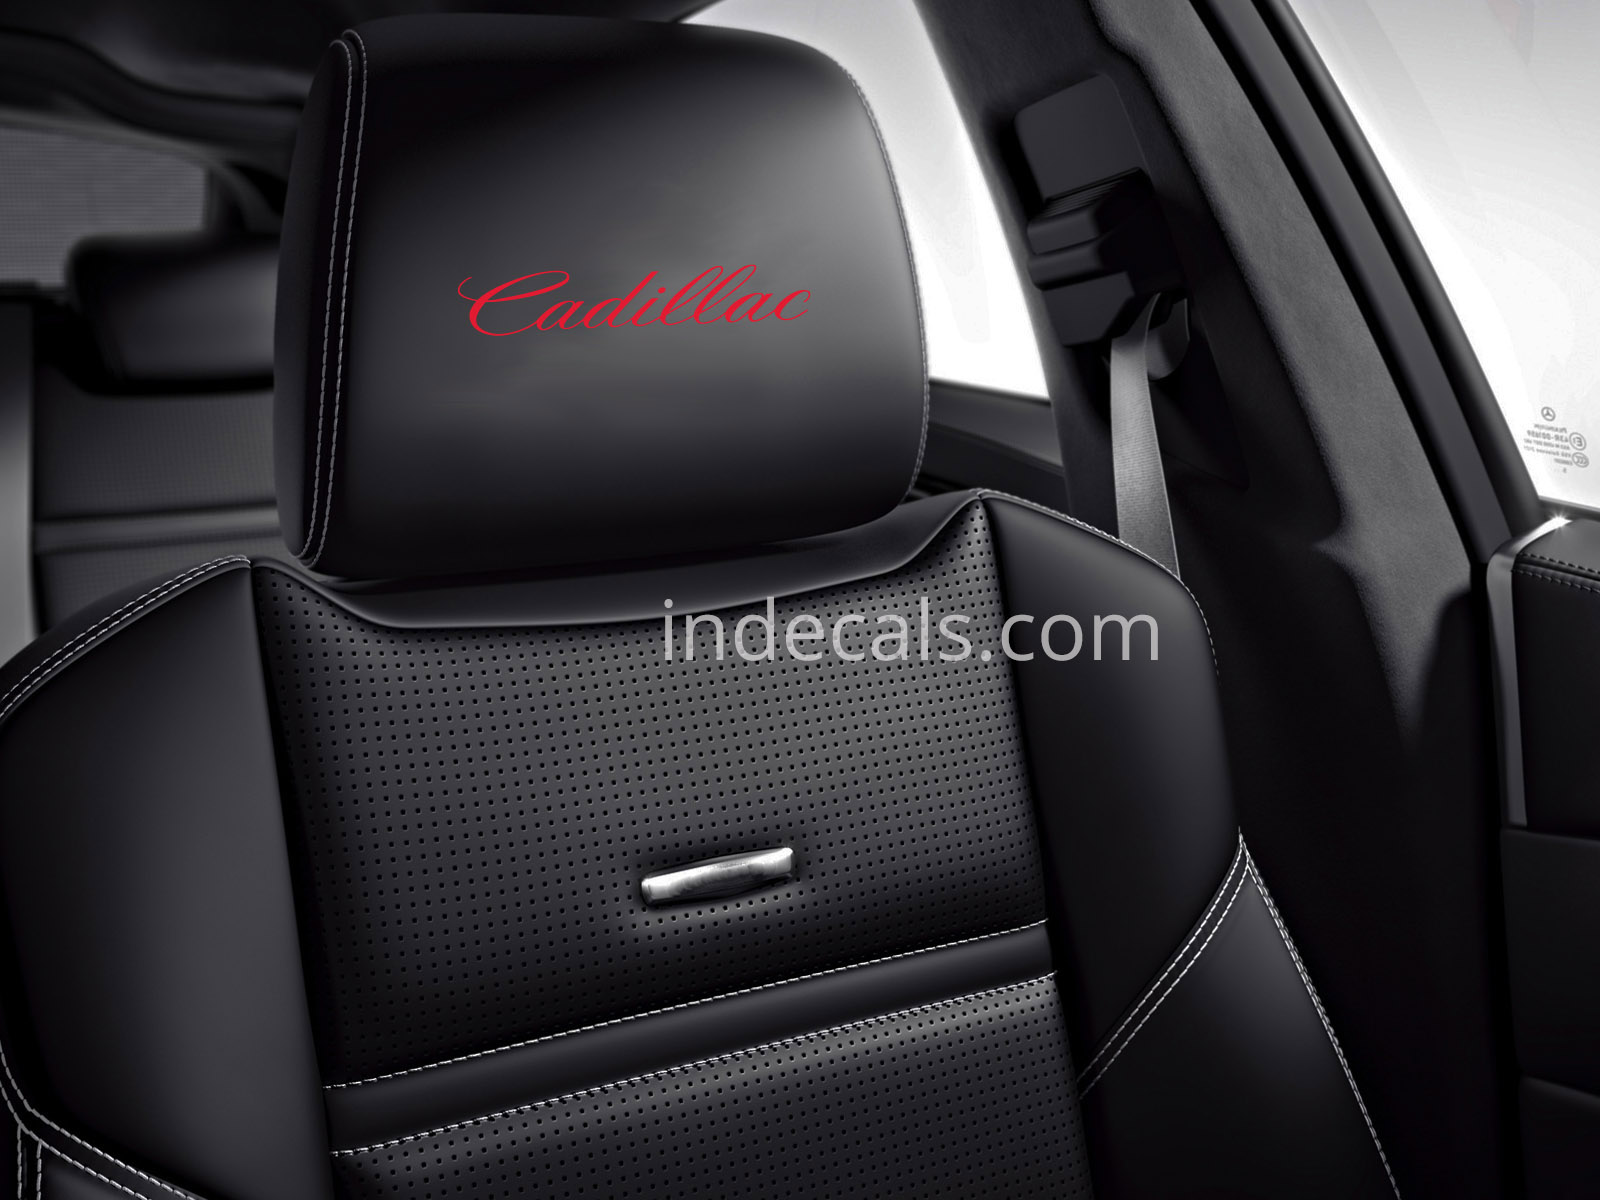 6 x Cadillac Stickers for Headrests - Red